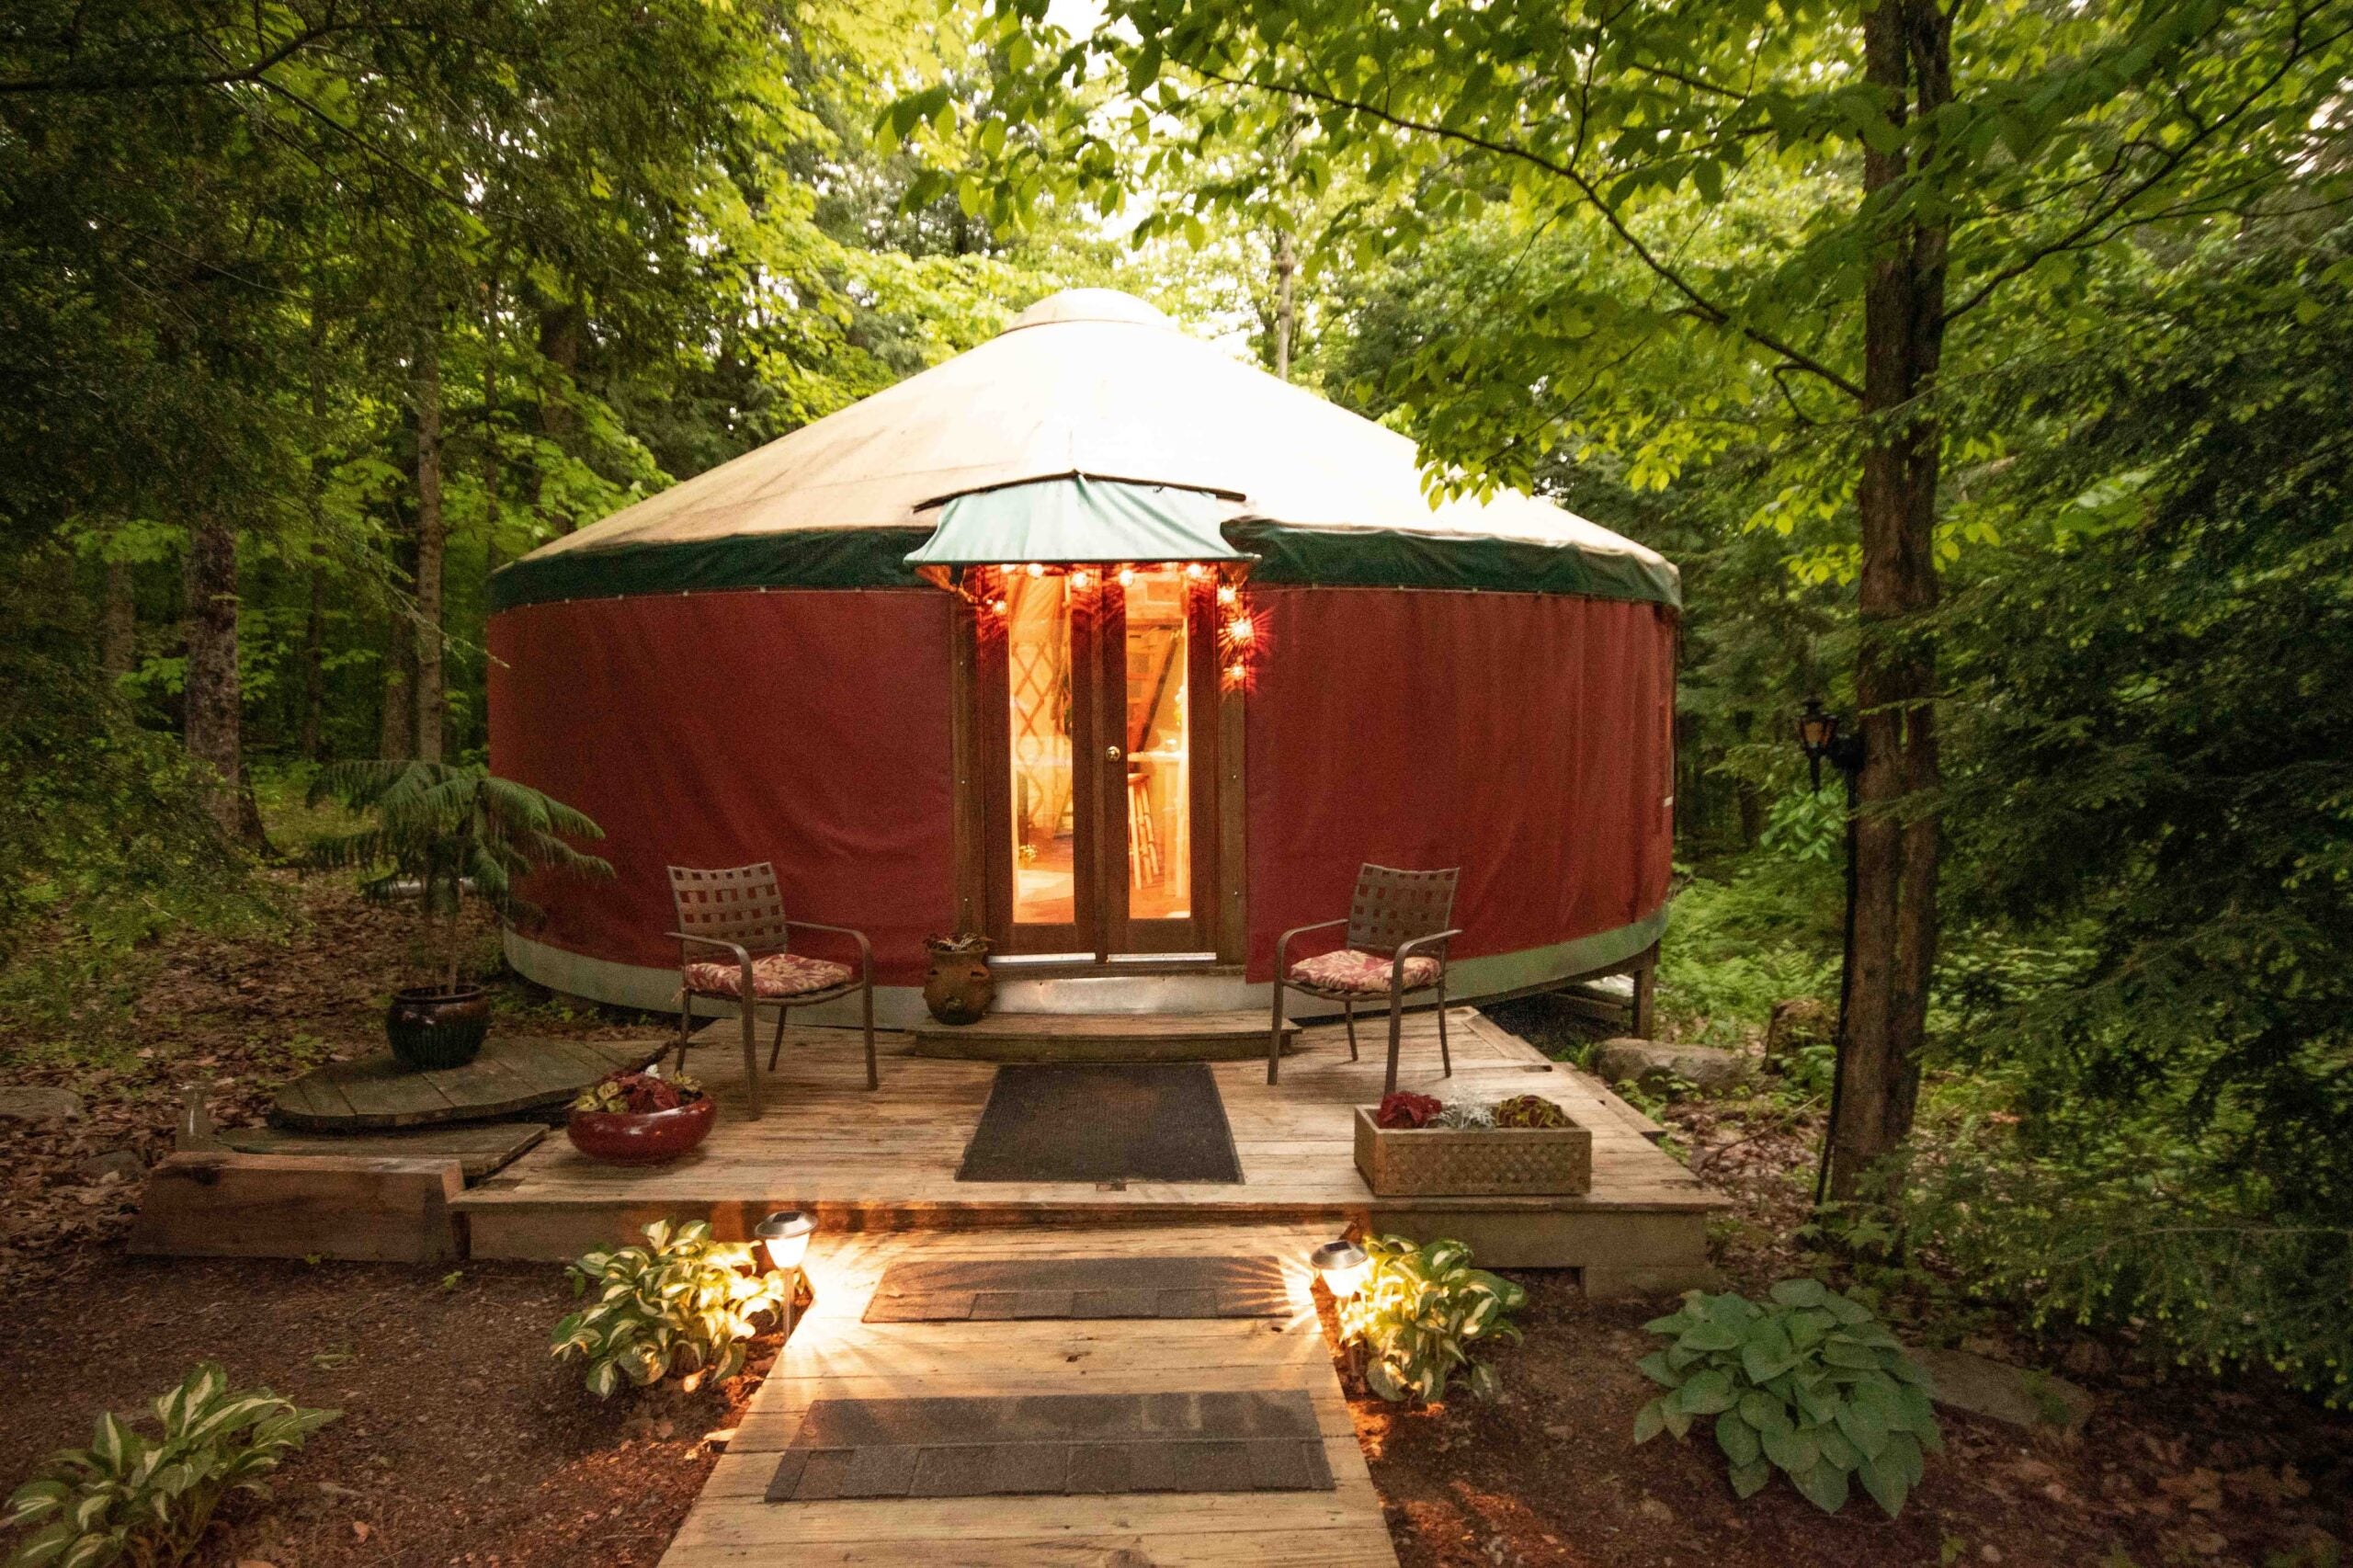 Have you thought about a yurt? A new trend in homesteading